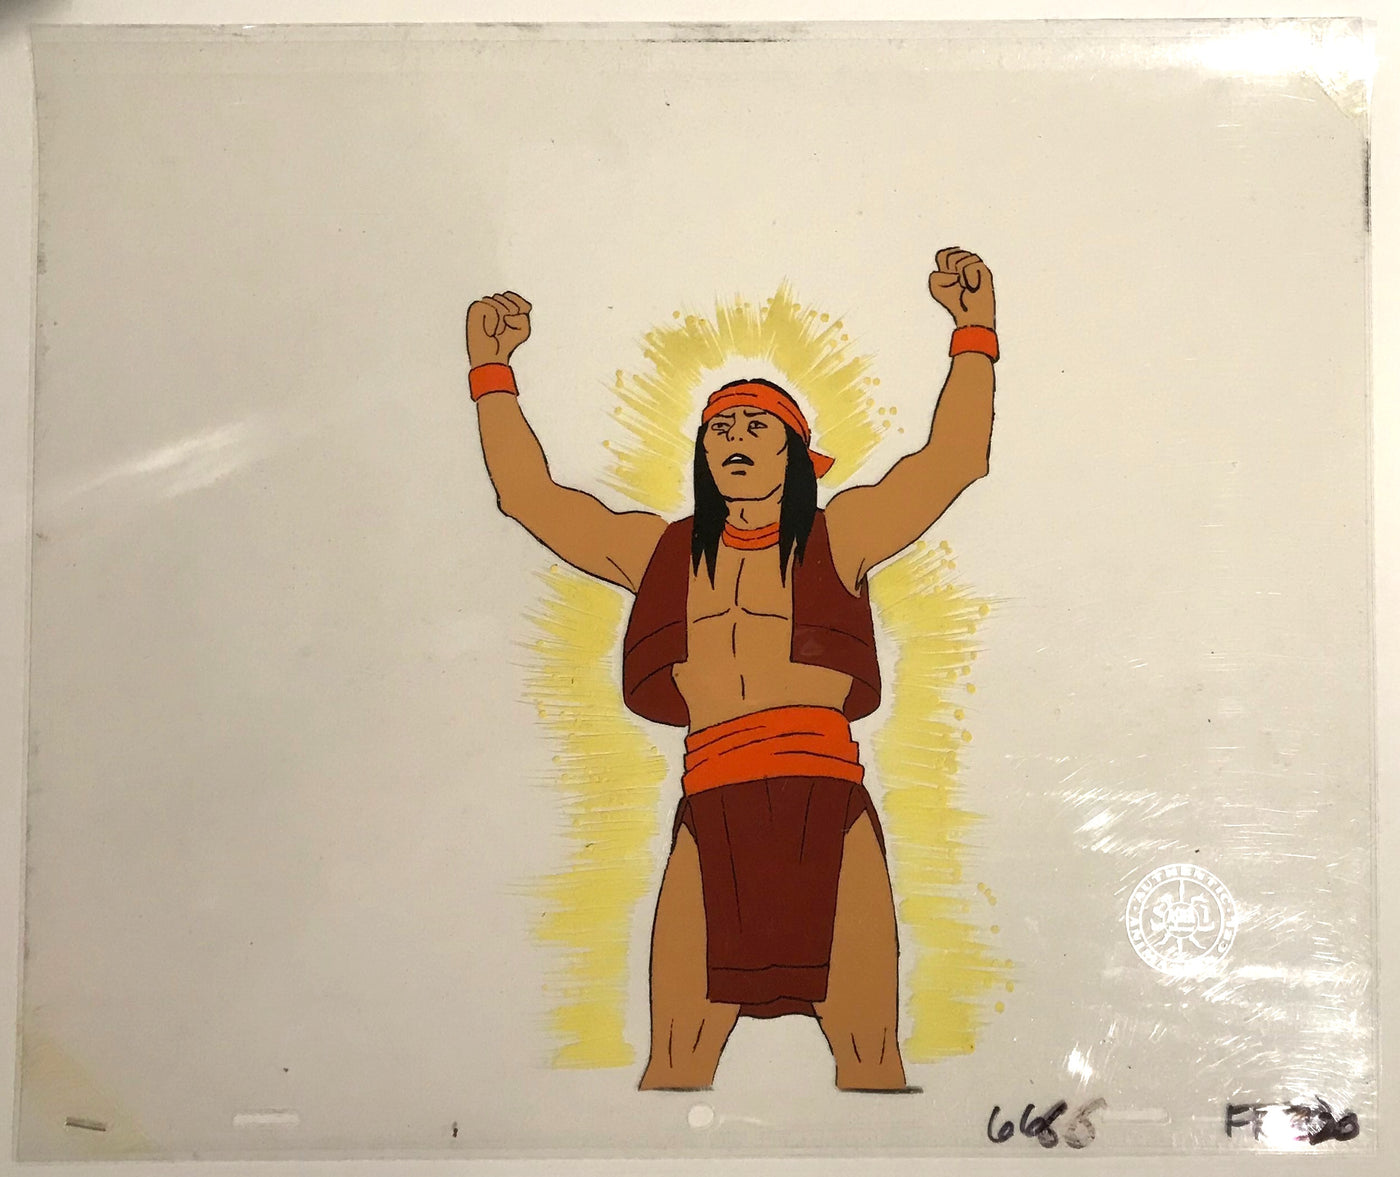 Hanna Barbera Production Cel from Super Friends featuring Apache Chief